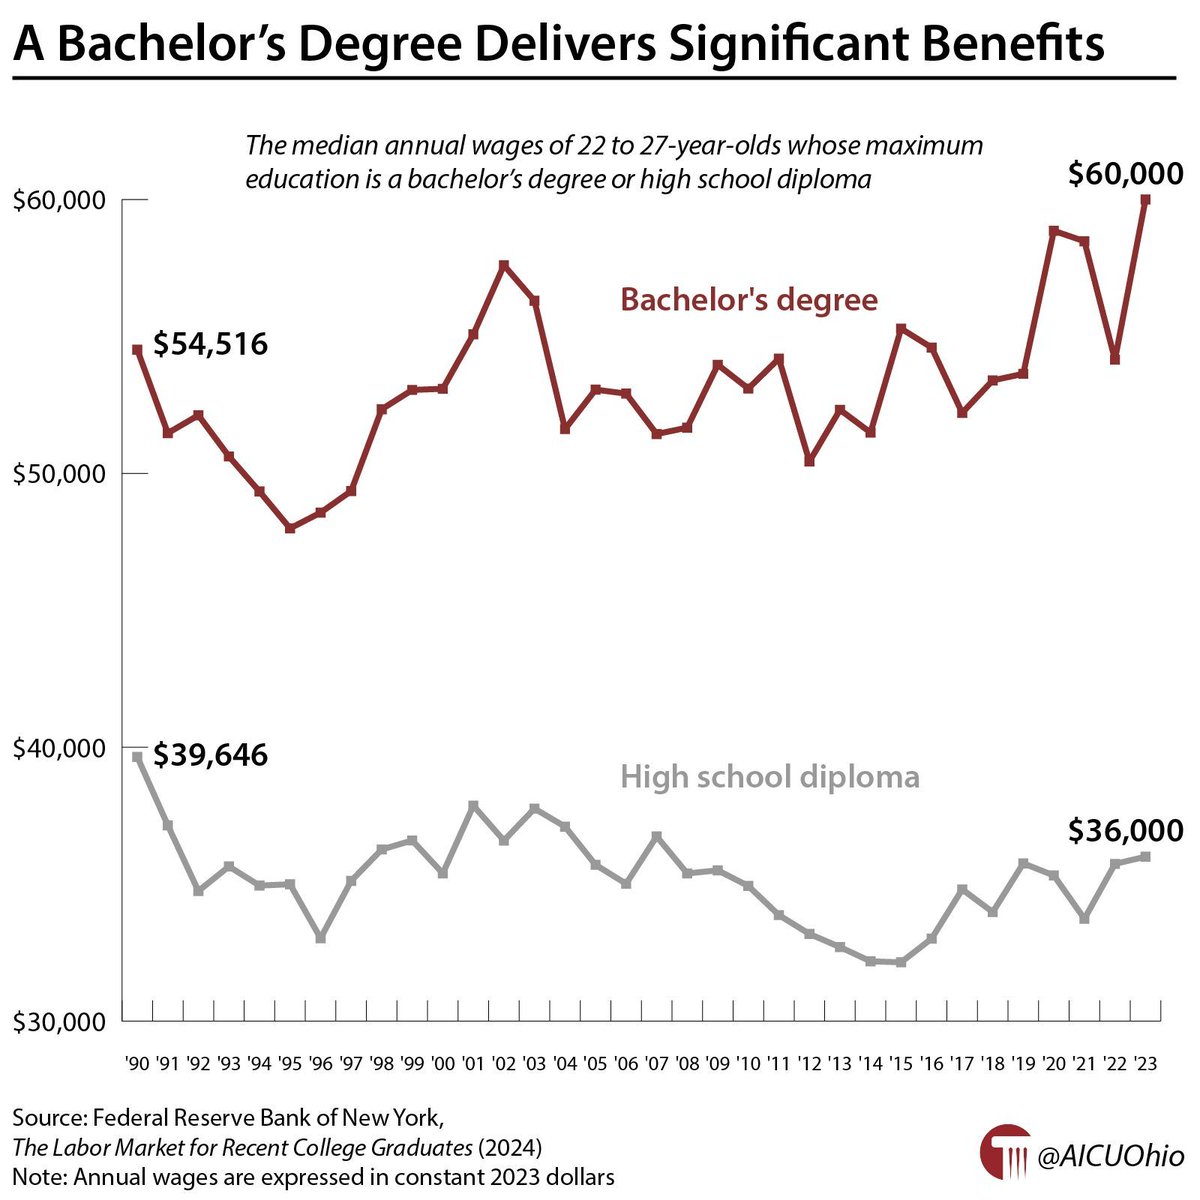 A bachelor's degree delivers significant benefits 🔗 buff.ly/3iHDKgR #GotW #HigherEd #OhioHigherEd